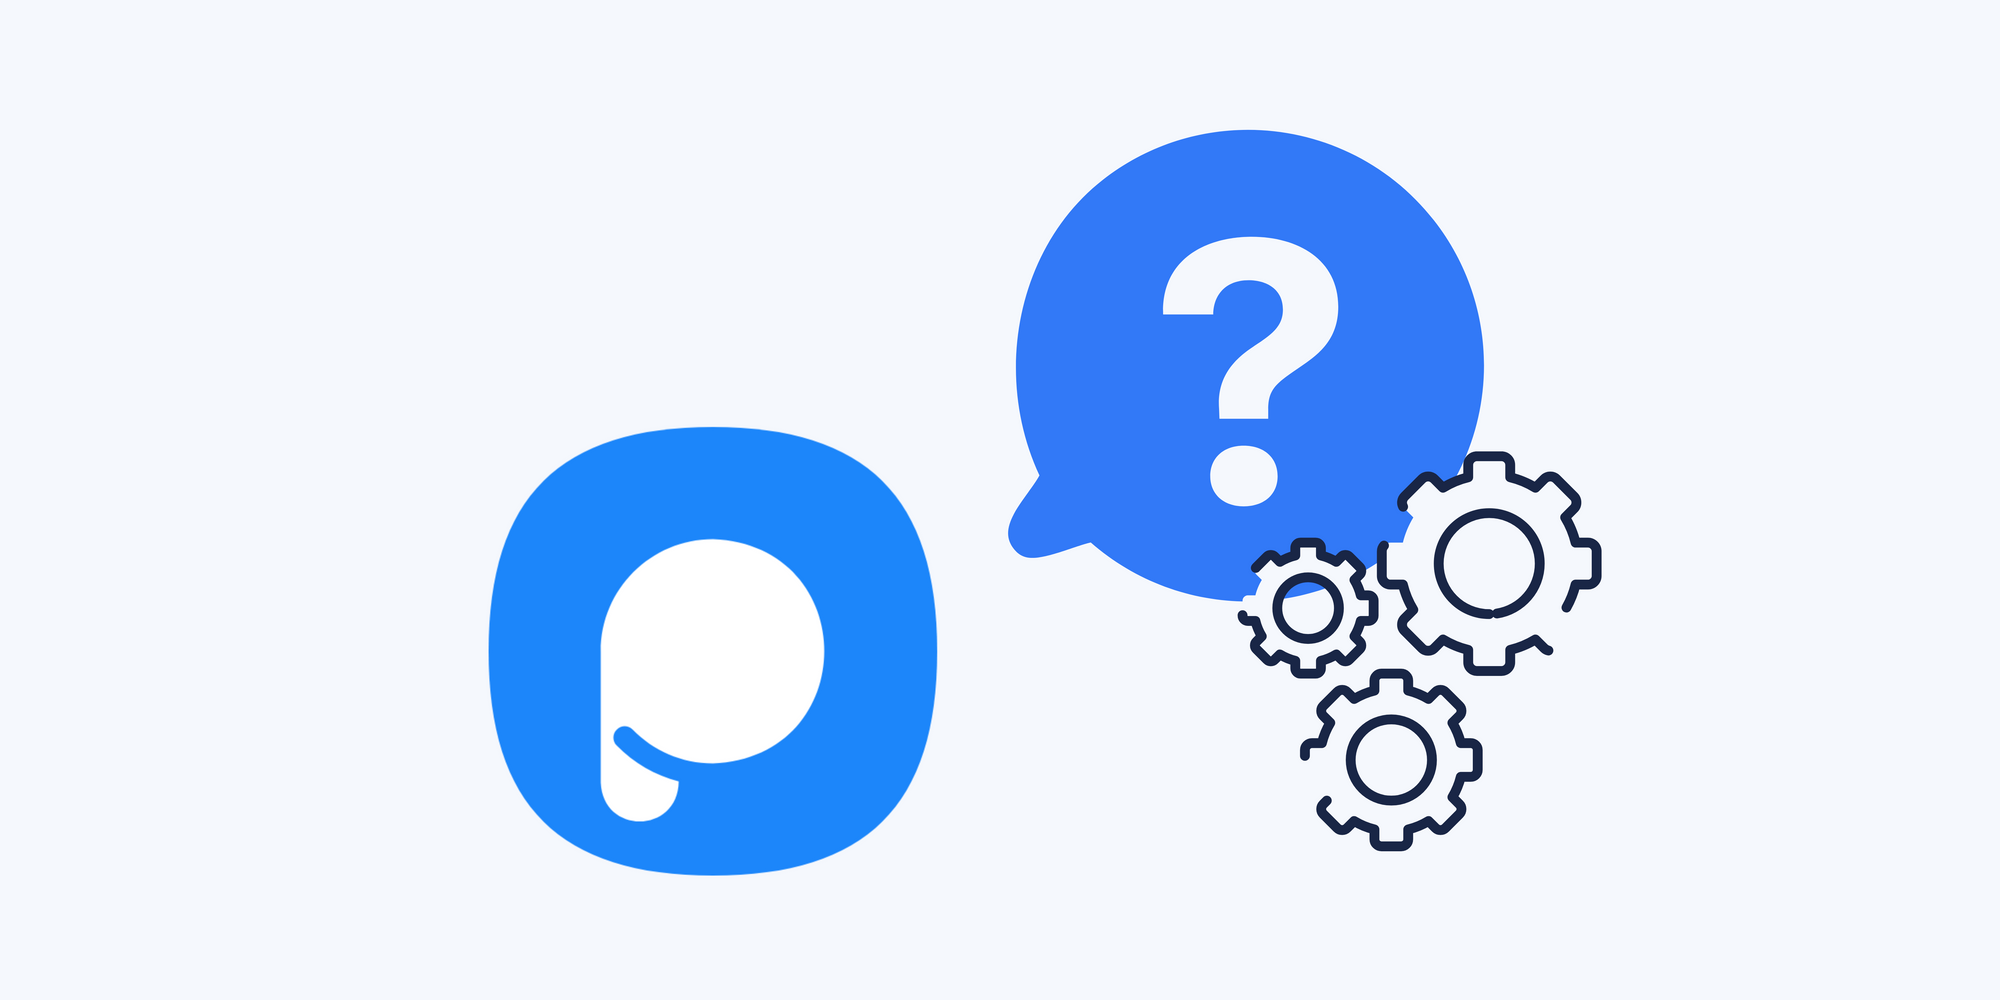 Popupsmart icon, a question mark and settings icon on blue background